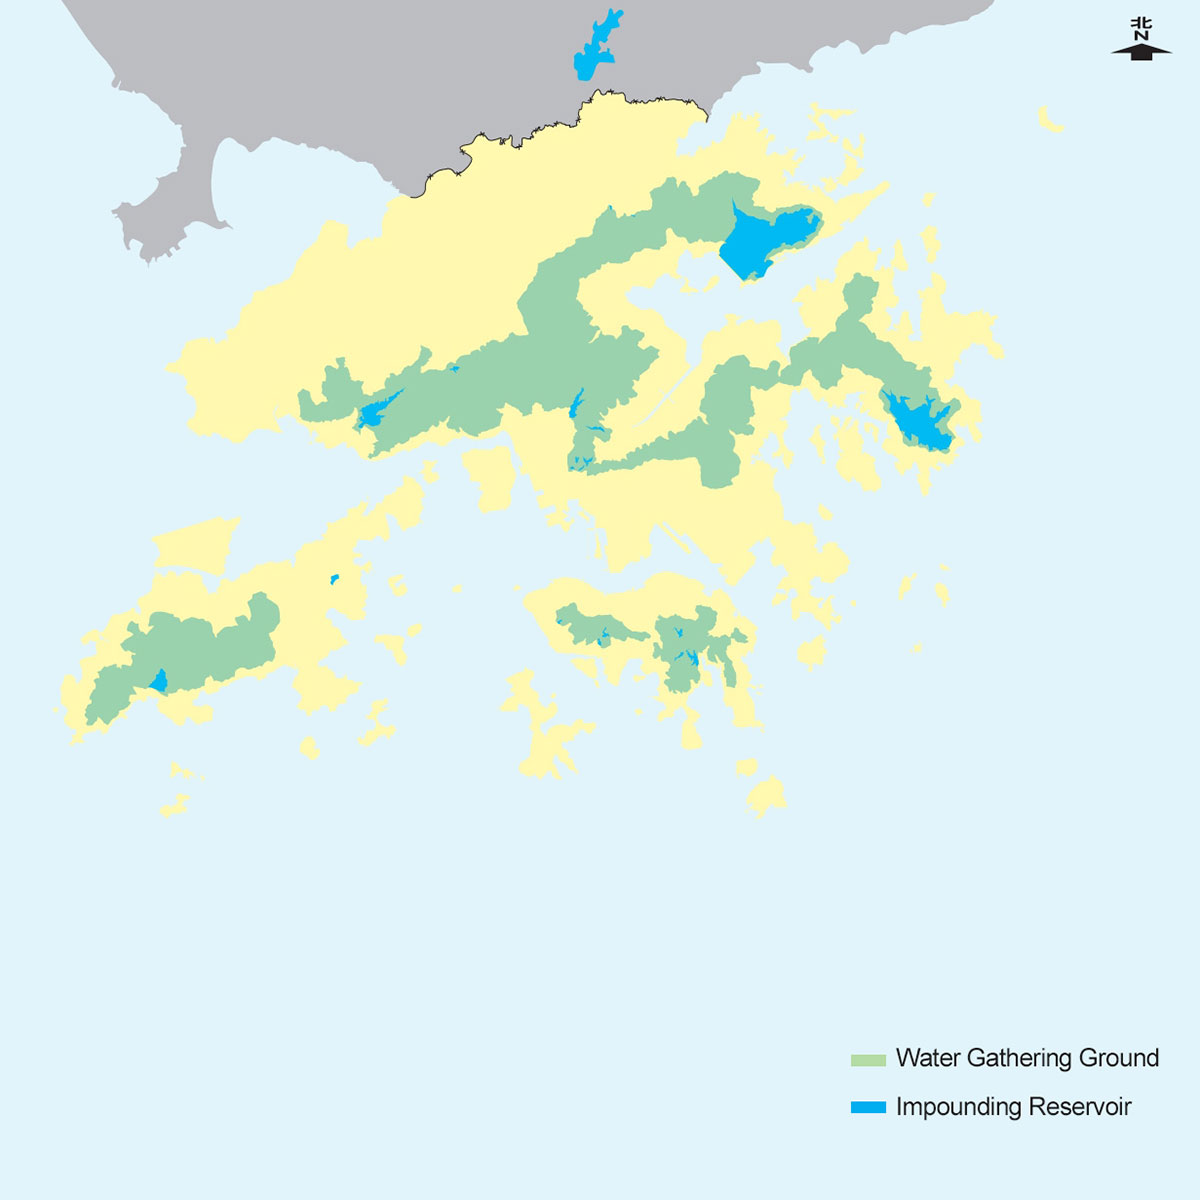 Water Gathering Grounds and Impounding Reservoirs in Hong Kong